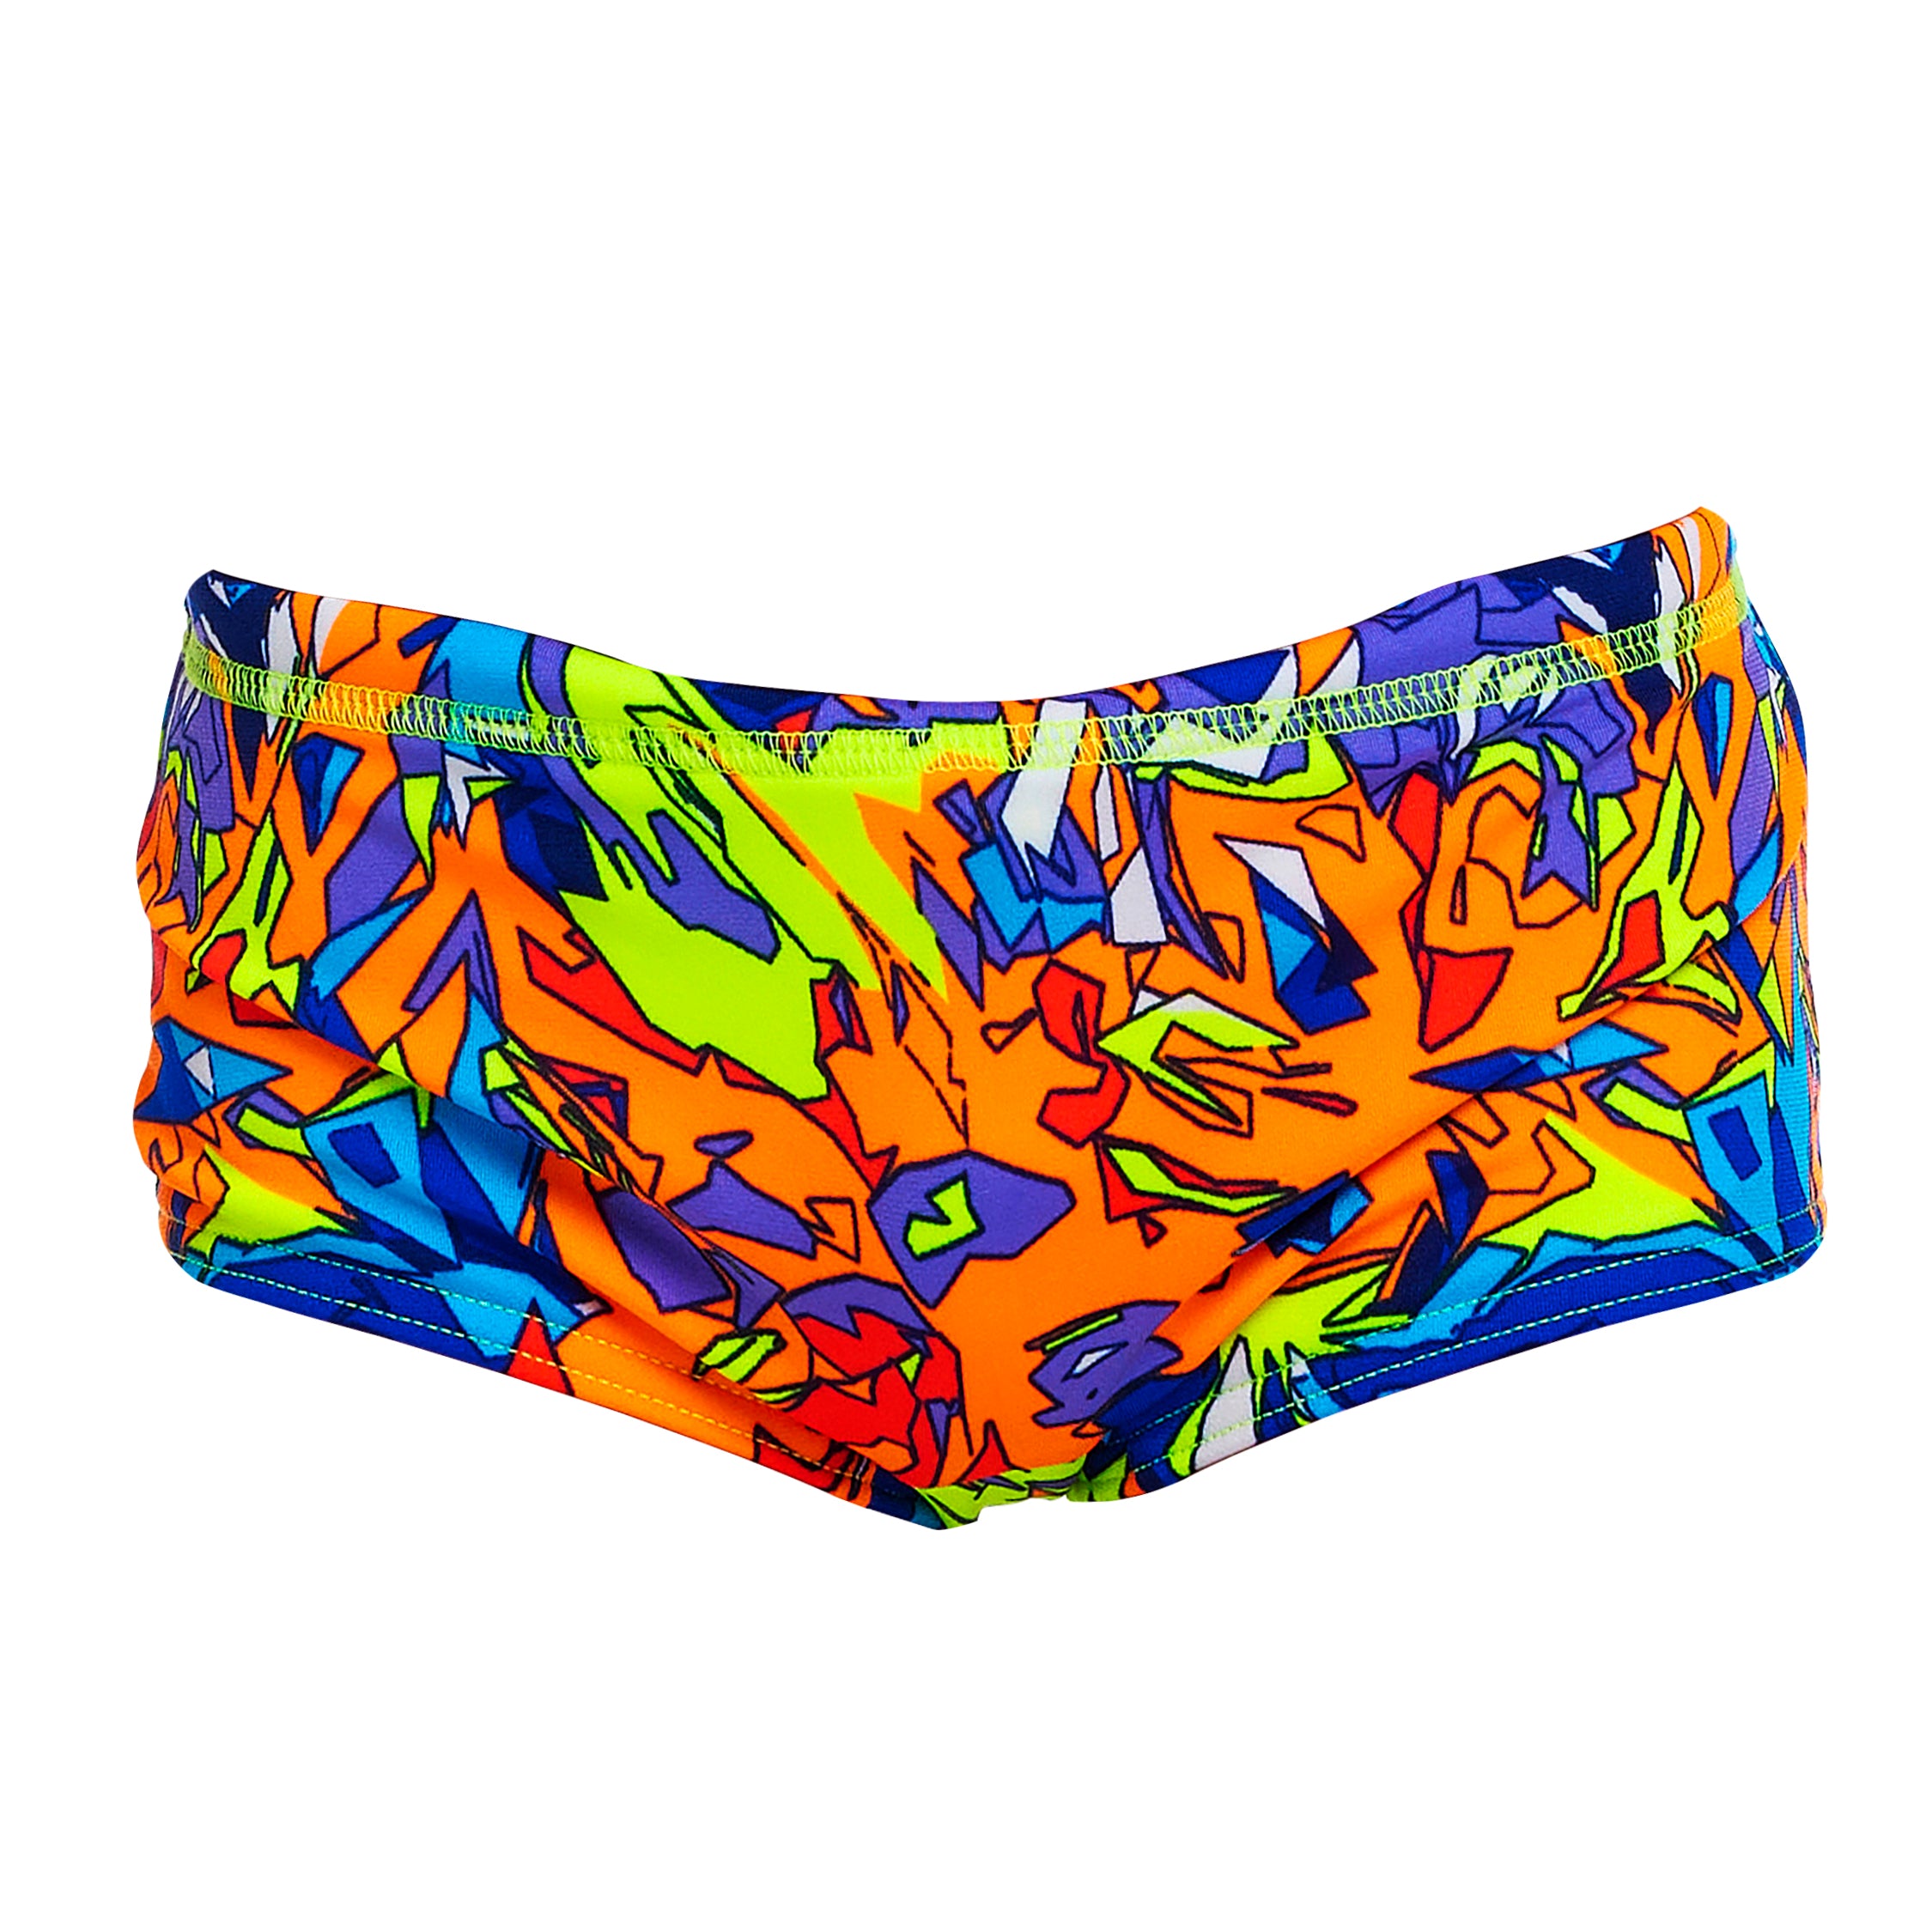 Funky Trunks - Mixed Mess - Toddler Boys Eco Printed Trunks